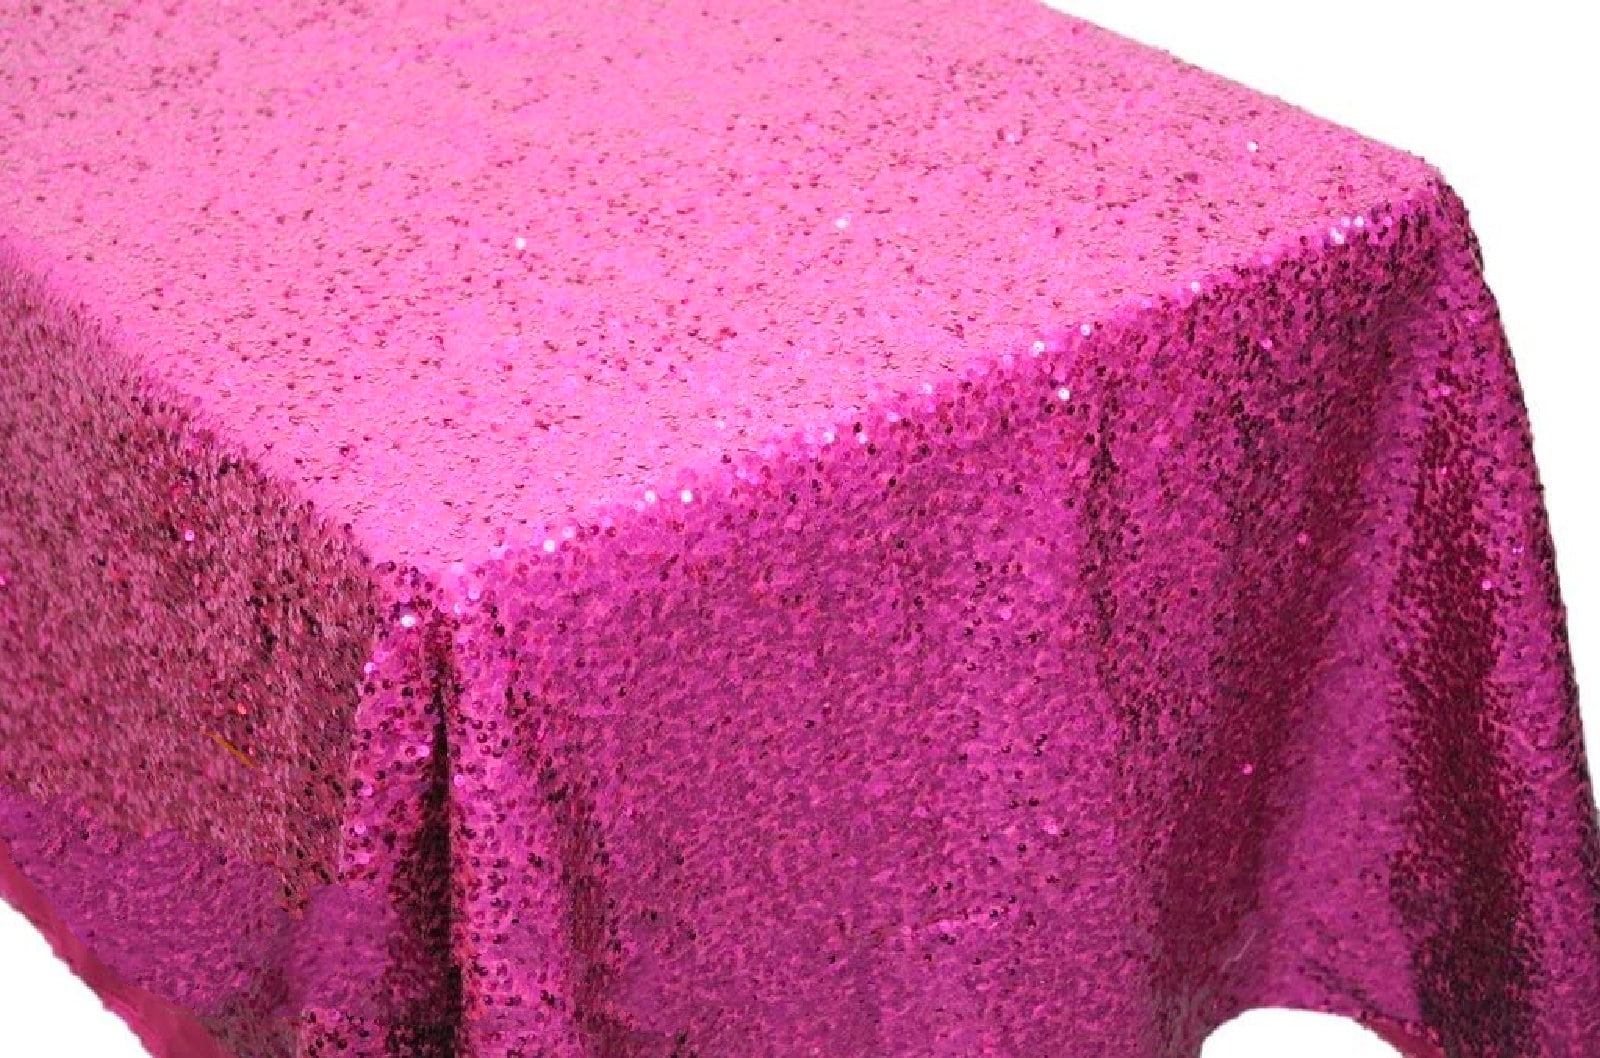  Ambesonne Hot Pink Tablecloth, Classical Simple Modern Design  with Vibrant Colored Diamond Line Pattern, Dining Room Kitchen Rectangular  Table Cover, 52 X 70, Pink Peach Fuchsia : Home & Kitchen